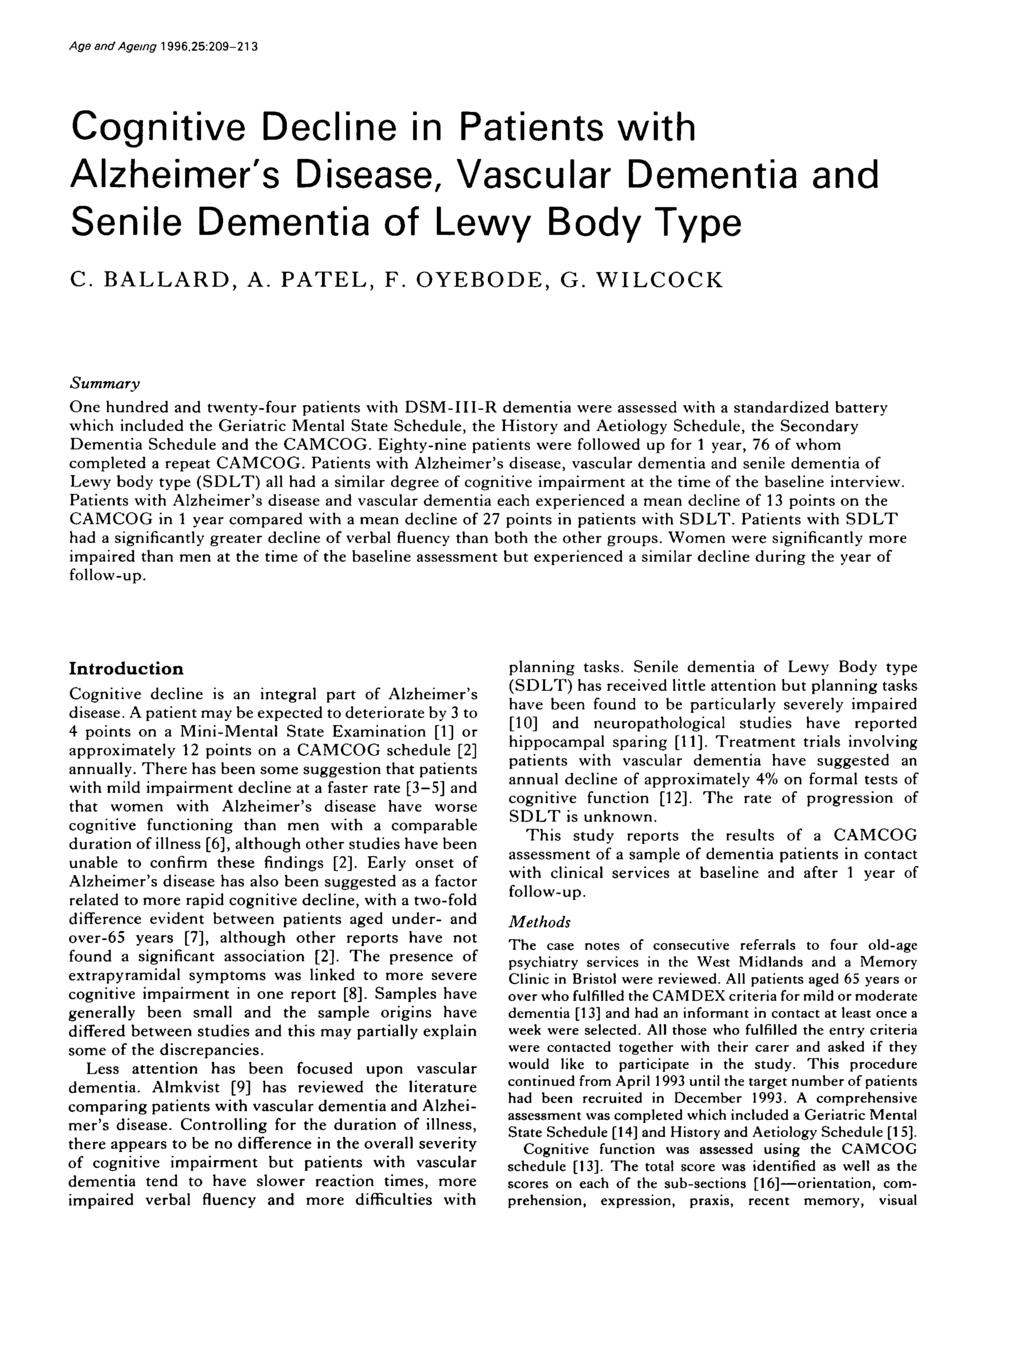 Age and Ageing 1996.25:209-21 3 Cognitive Decline in atients with Alzheimer's Disease, Vascular Dementia and Senile Dementia of Lewy Body Type C. BALLARD, A. ATEL, F. OYEBODE, G.